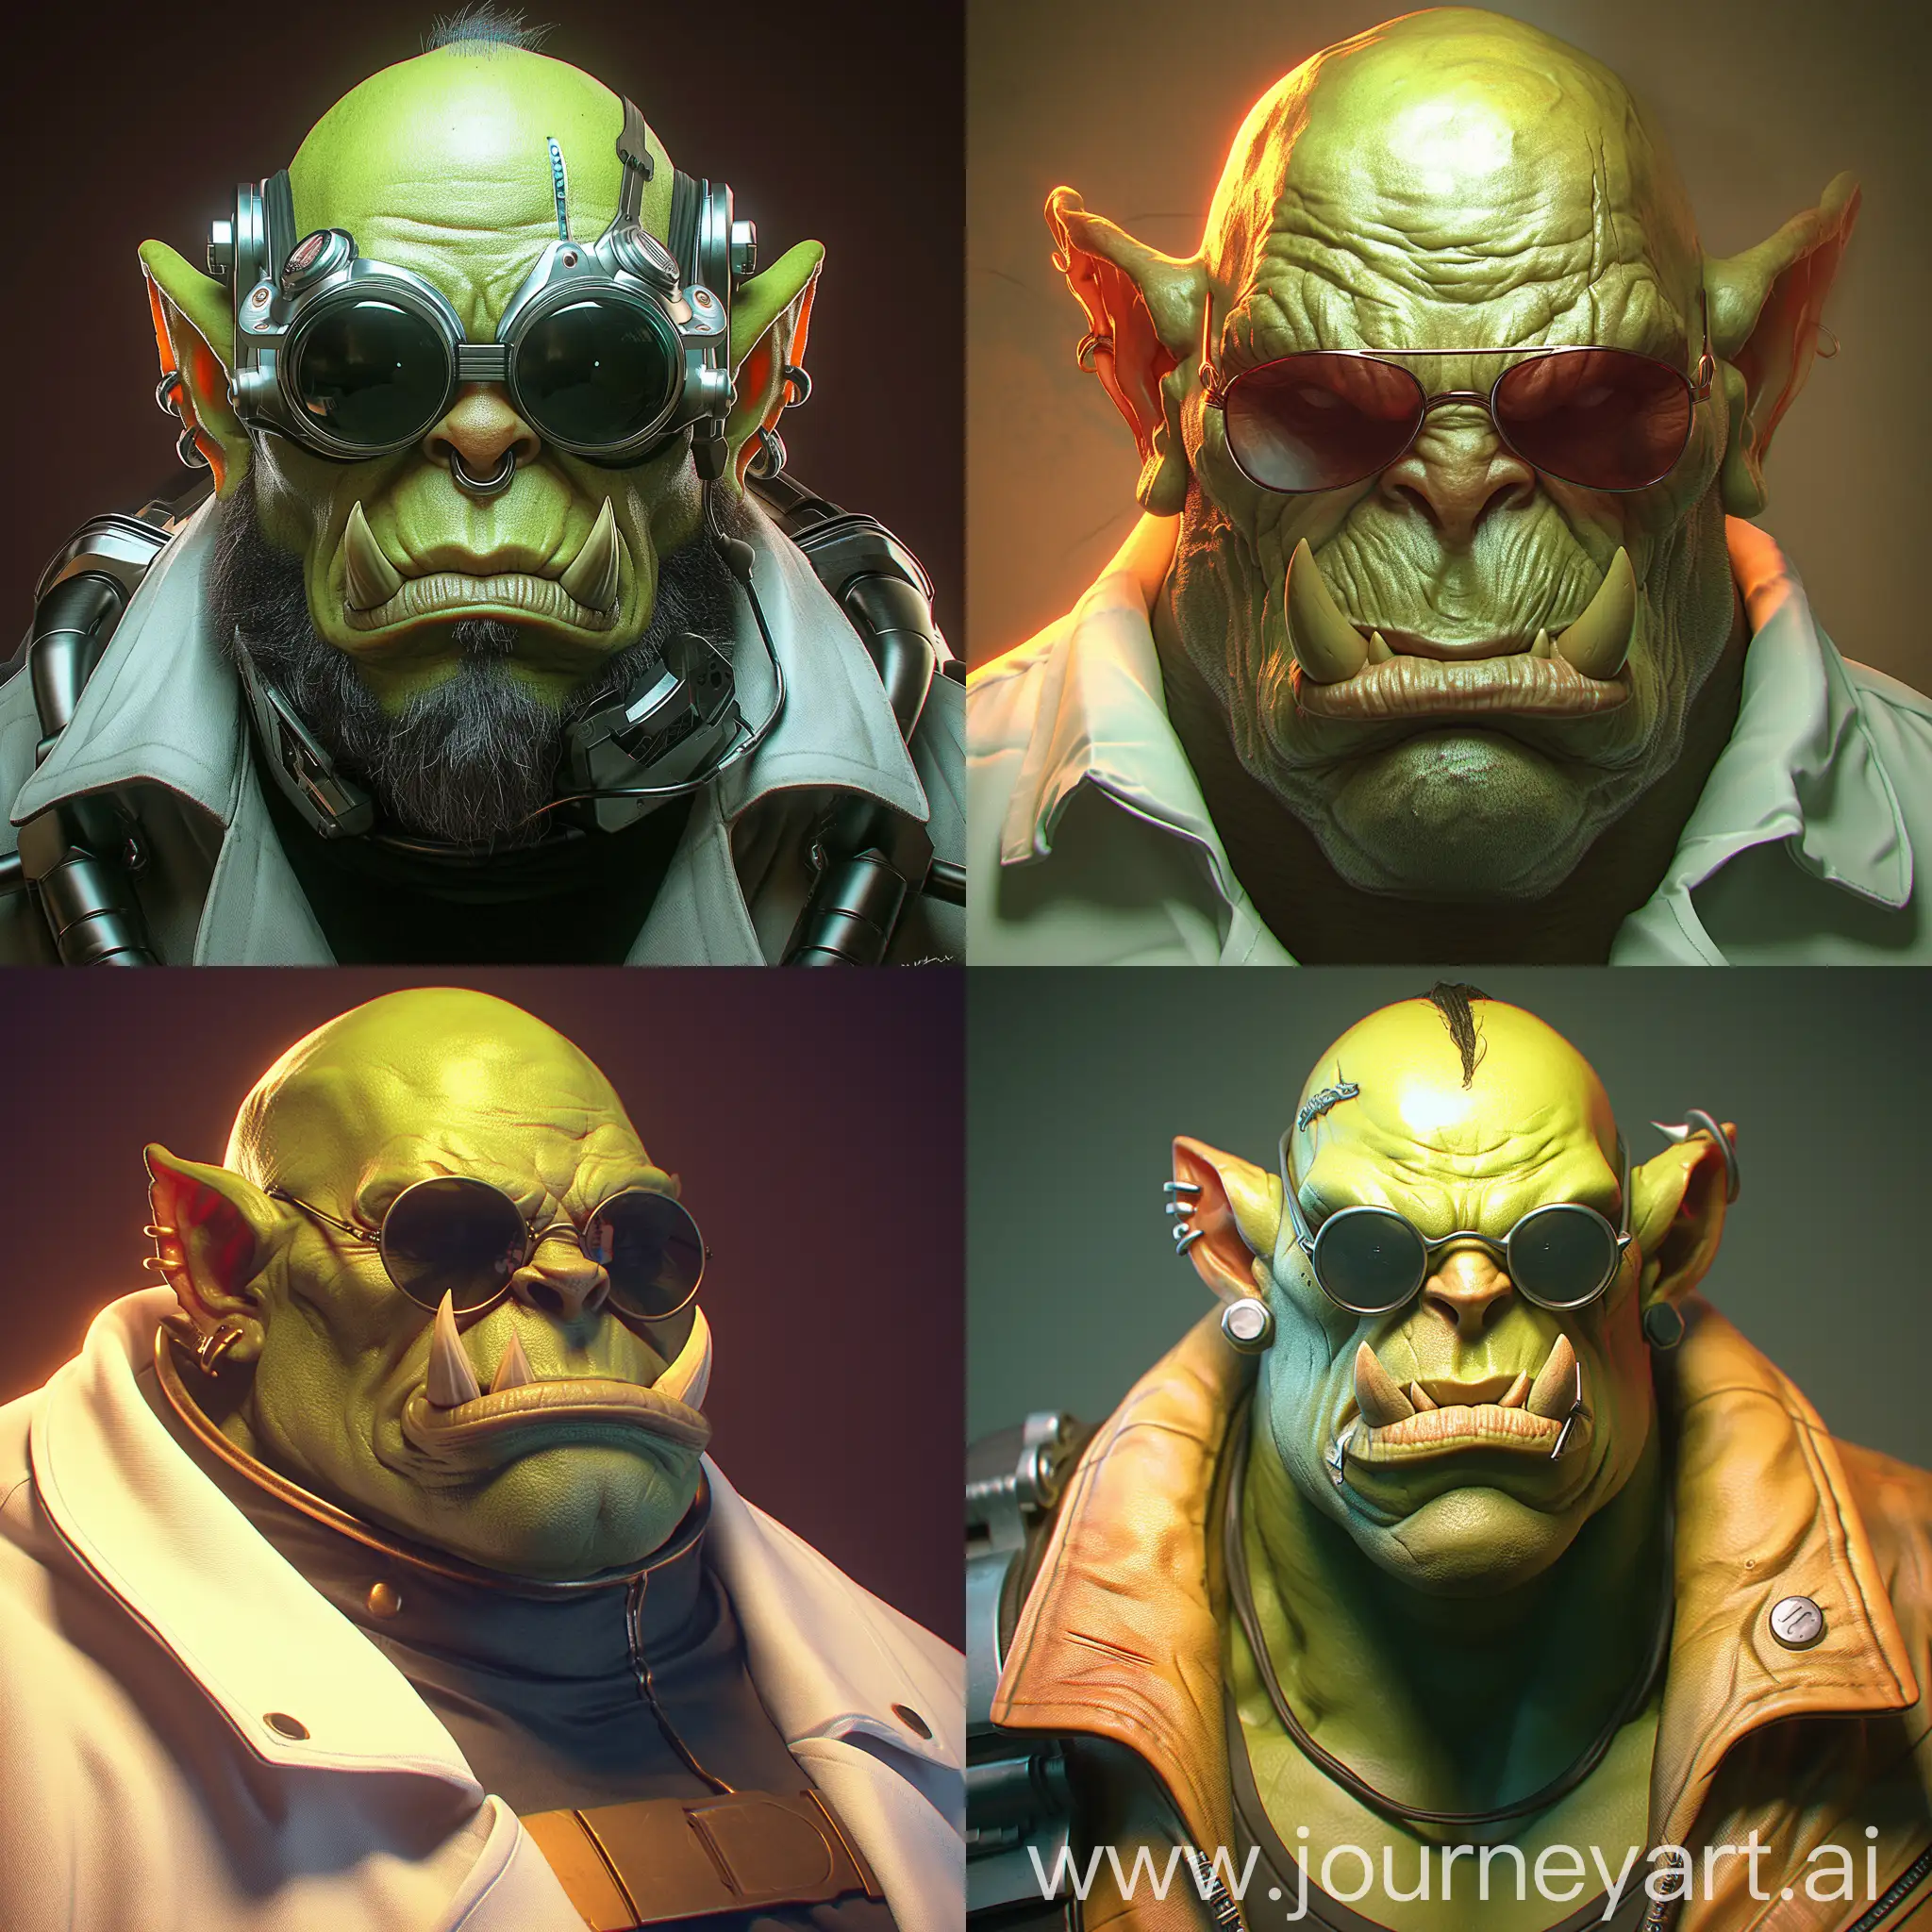 Orc-Scientist-Wearing-Sunglasses-in-High-Definition-3D-Render